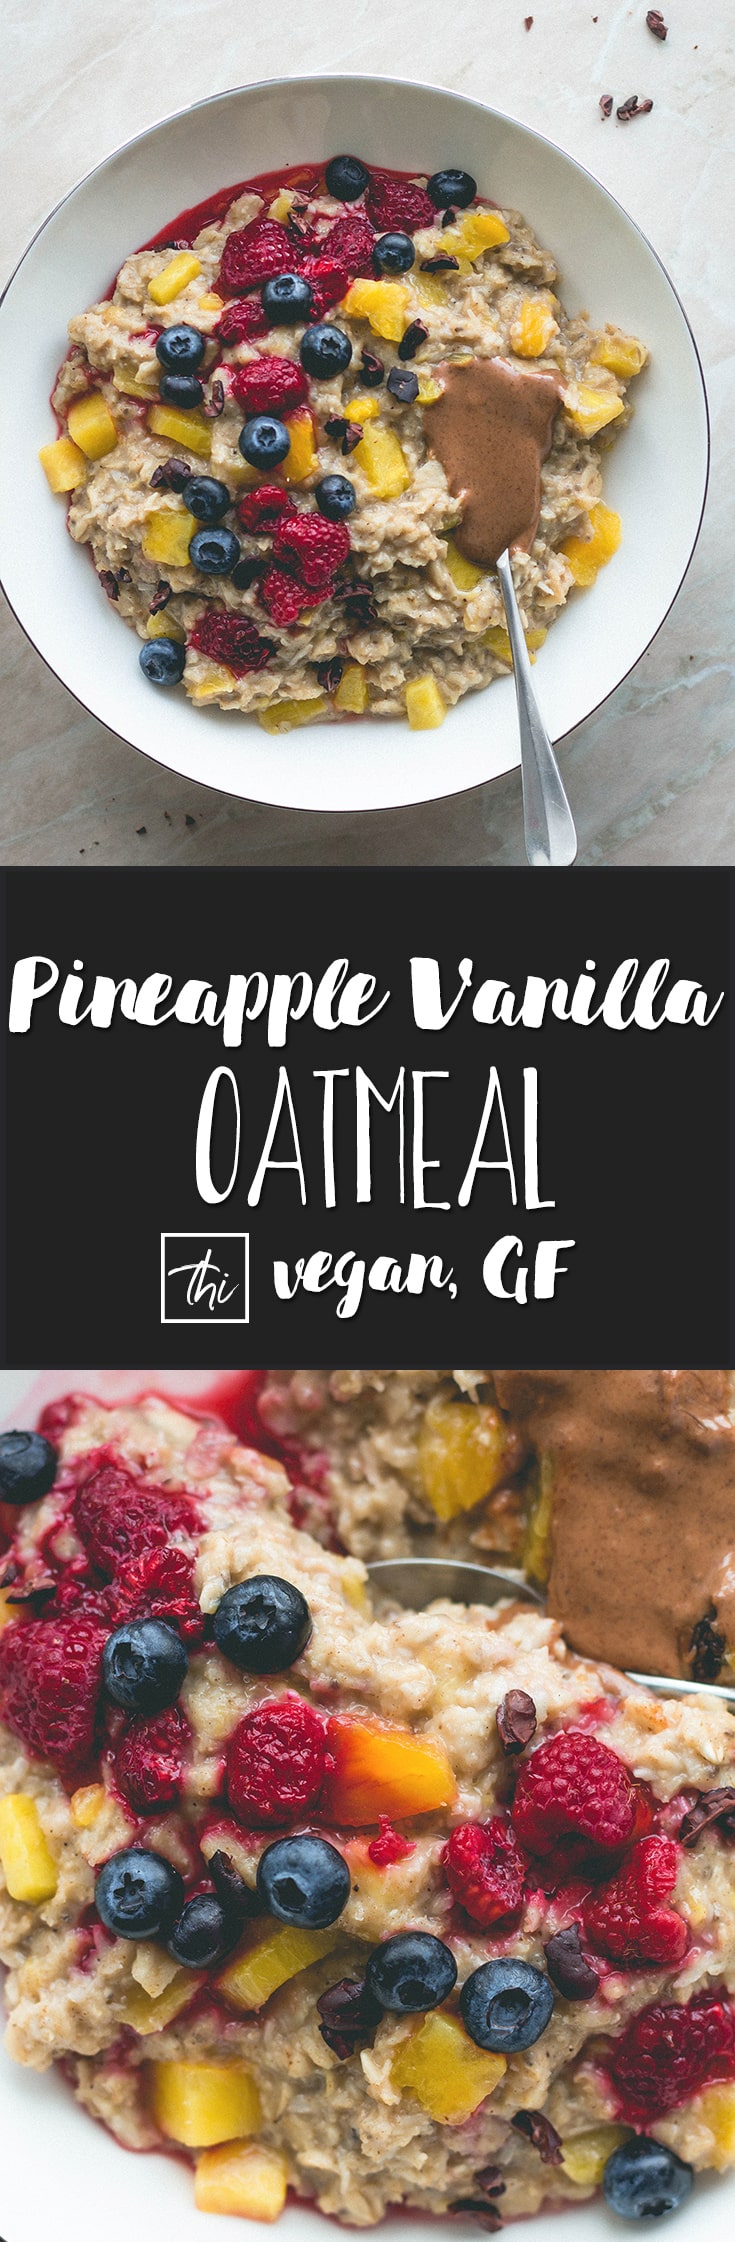 Pineapple Vanilla Oatmeal (vegan, gluten-free) - the best tropical breakfast! Only a few simple ingredients and 15 minutes to make. This pina colada oatmeal is really easy to make and super delicious! You'll love this recipe! | thehealthfulideas.com